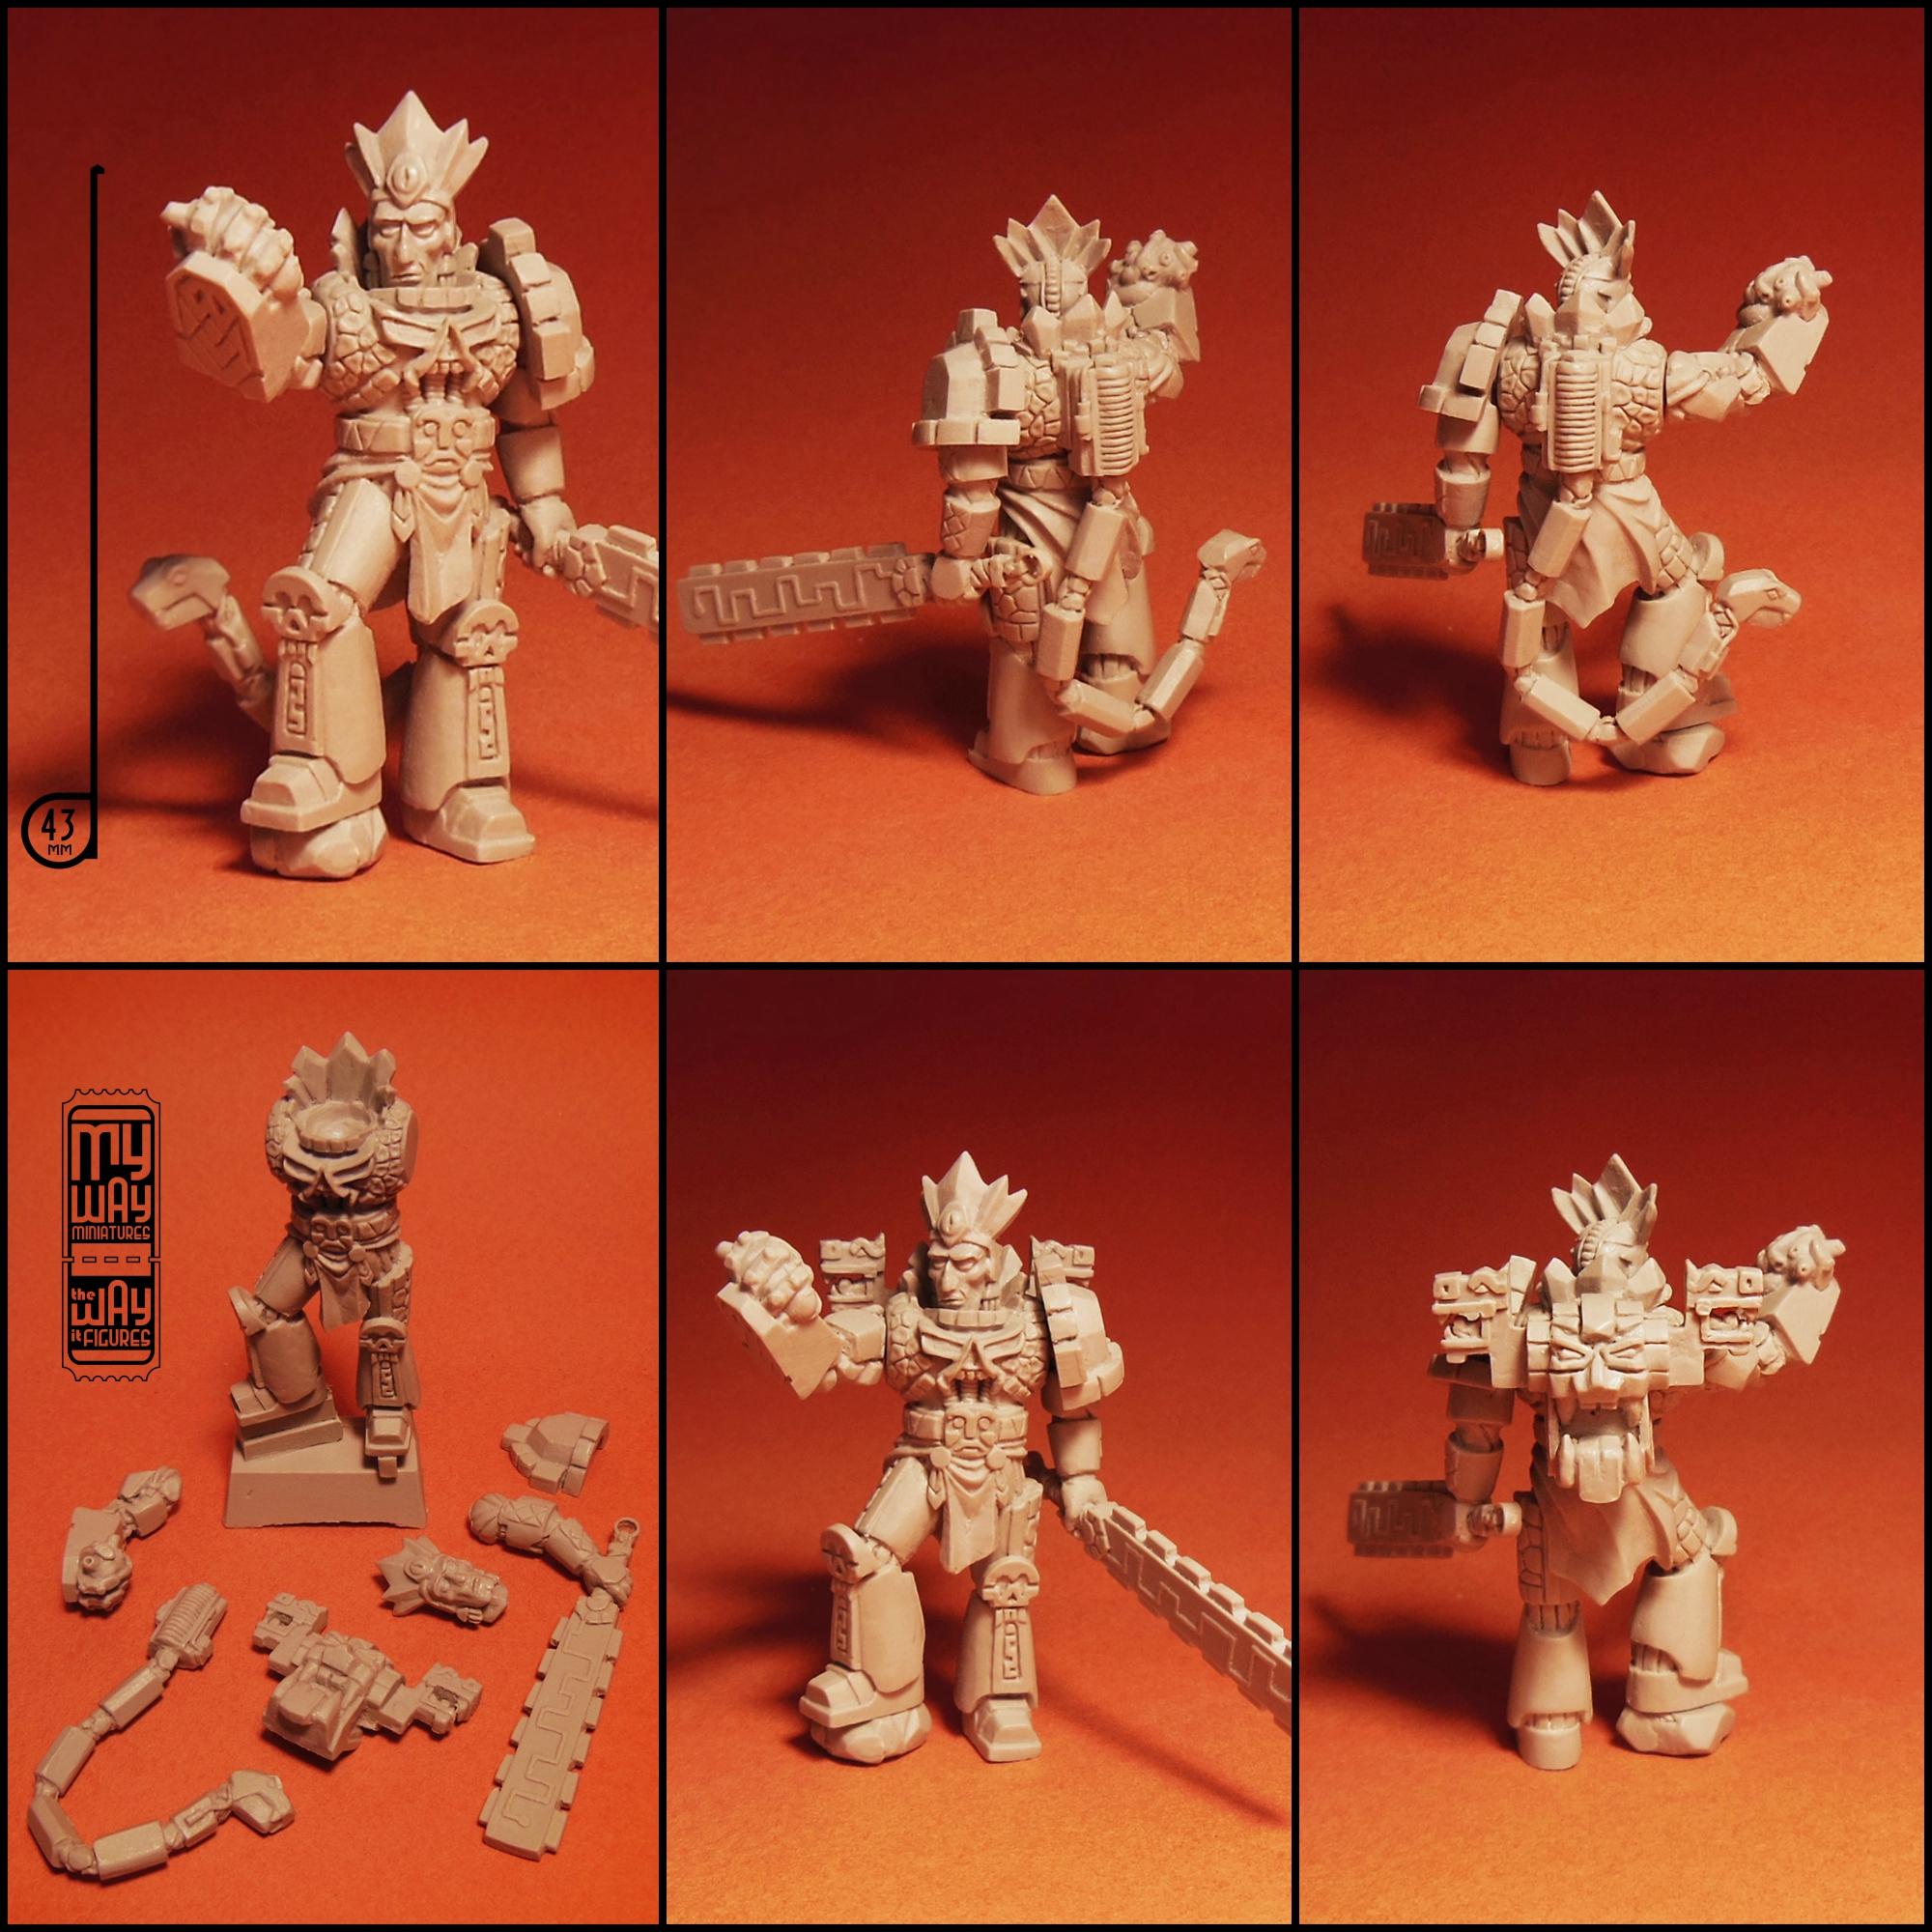 Aztec, Chaos, Conversion, Custom, Miniatures, Myway, Space, Space Marines, True Scale, Warhammer 40,000, Warhammer Fantasy